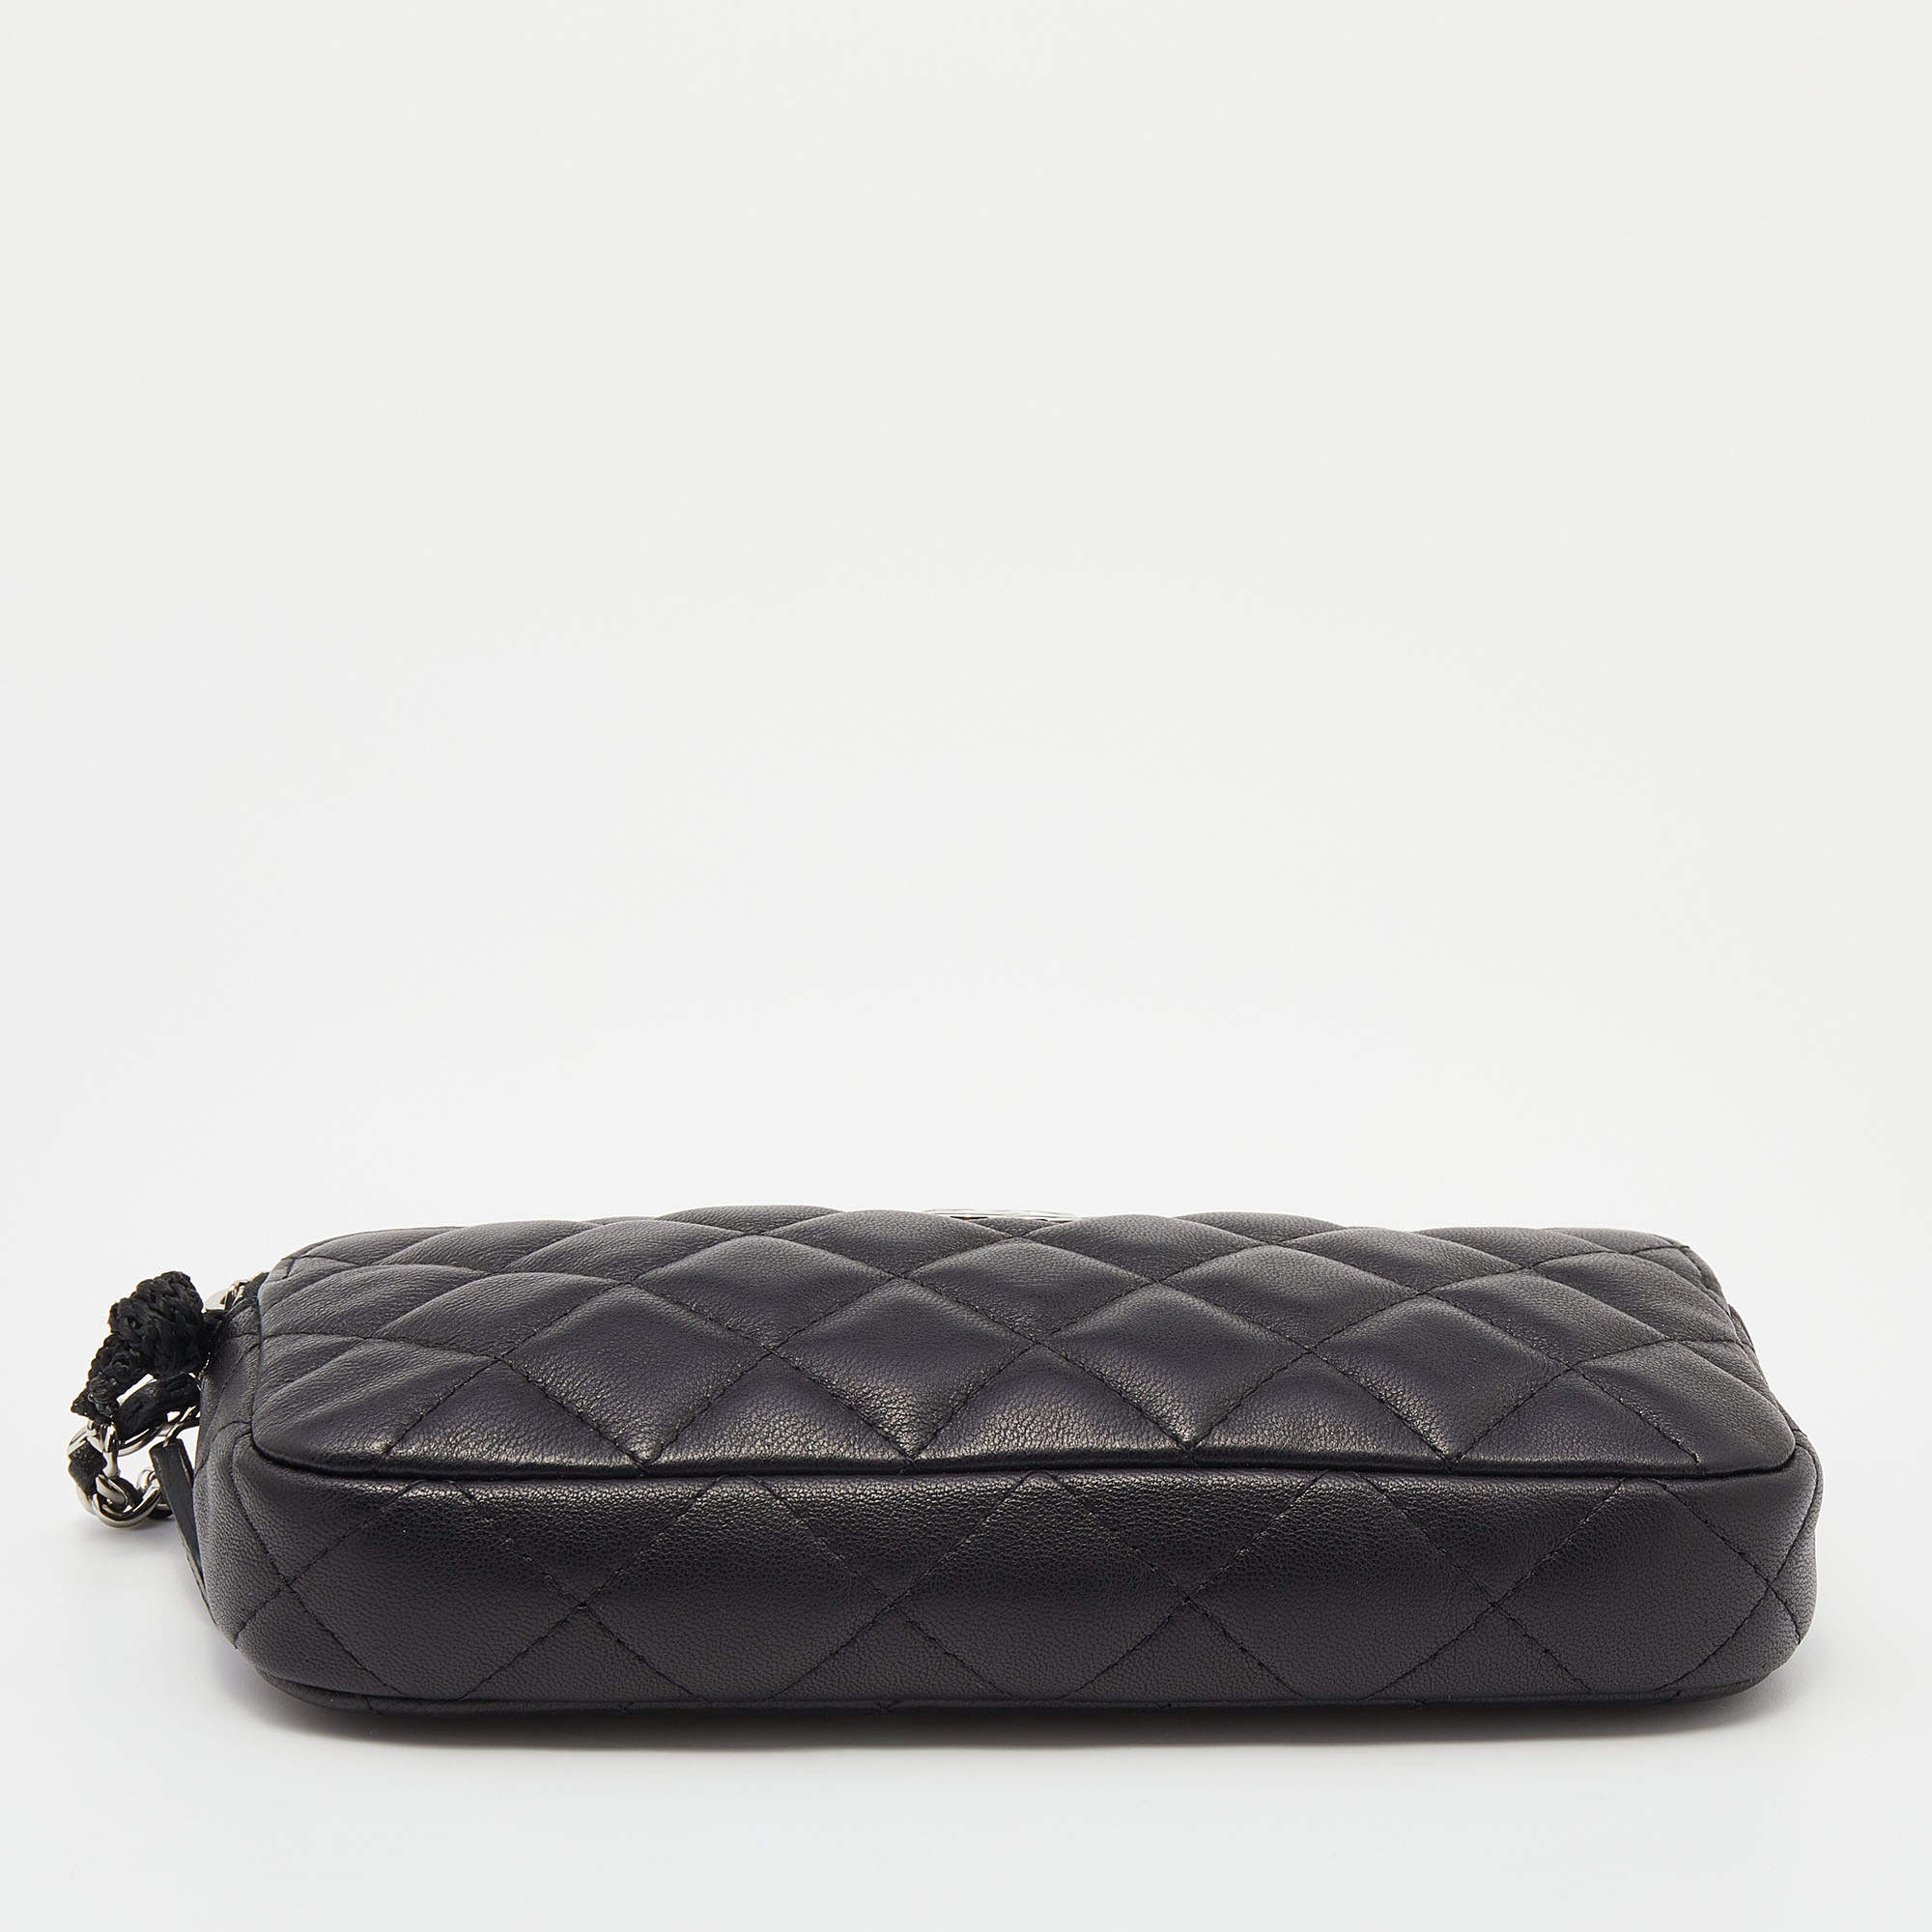 Chanel Black Quilted Leather CC Double Zip Clutch Chain Bag